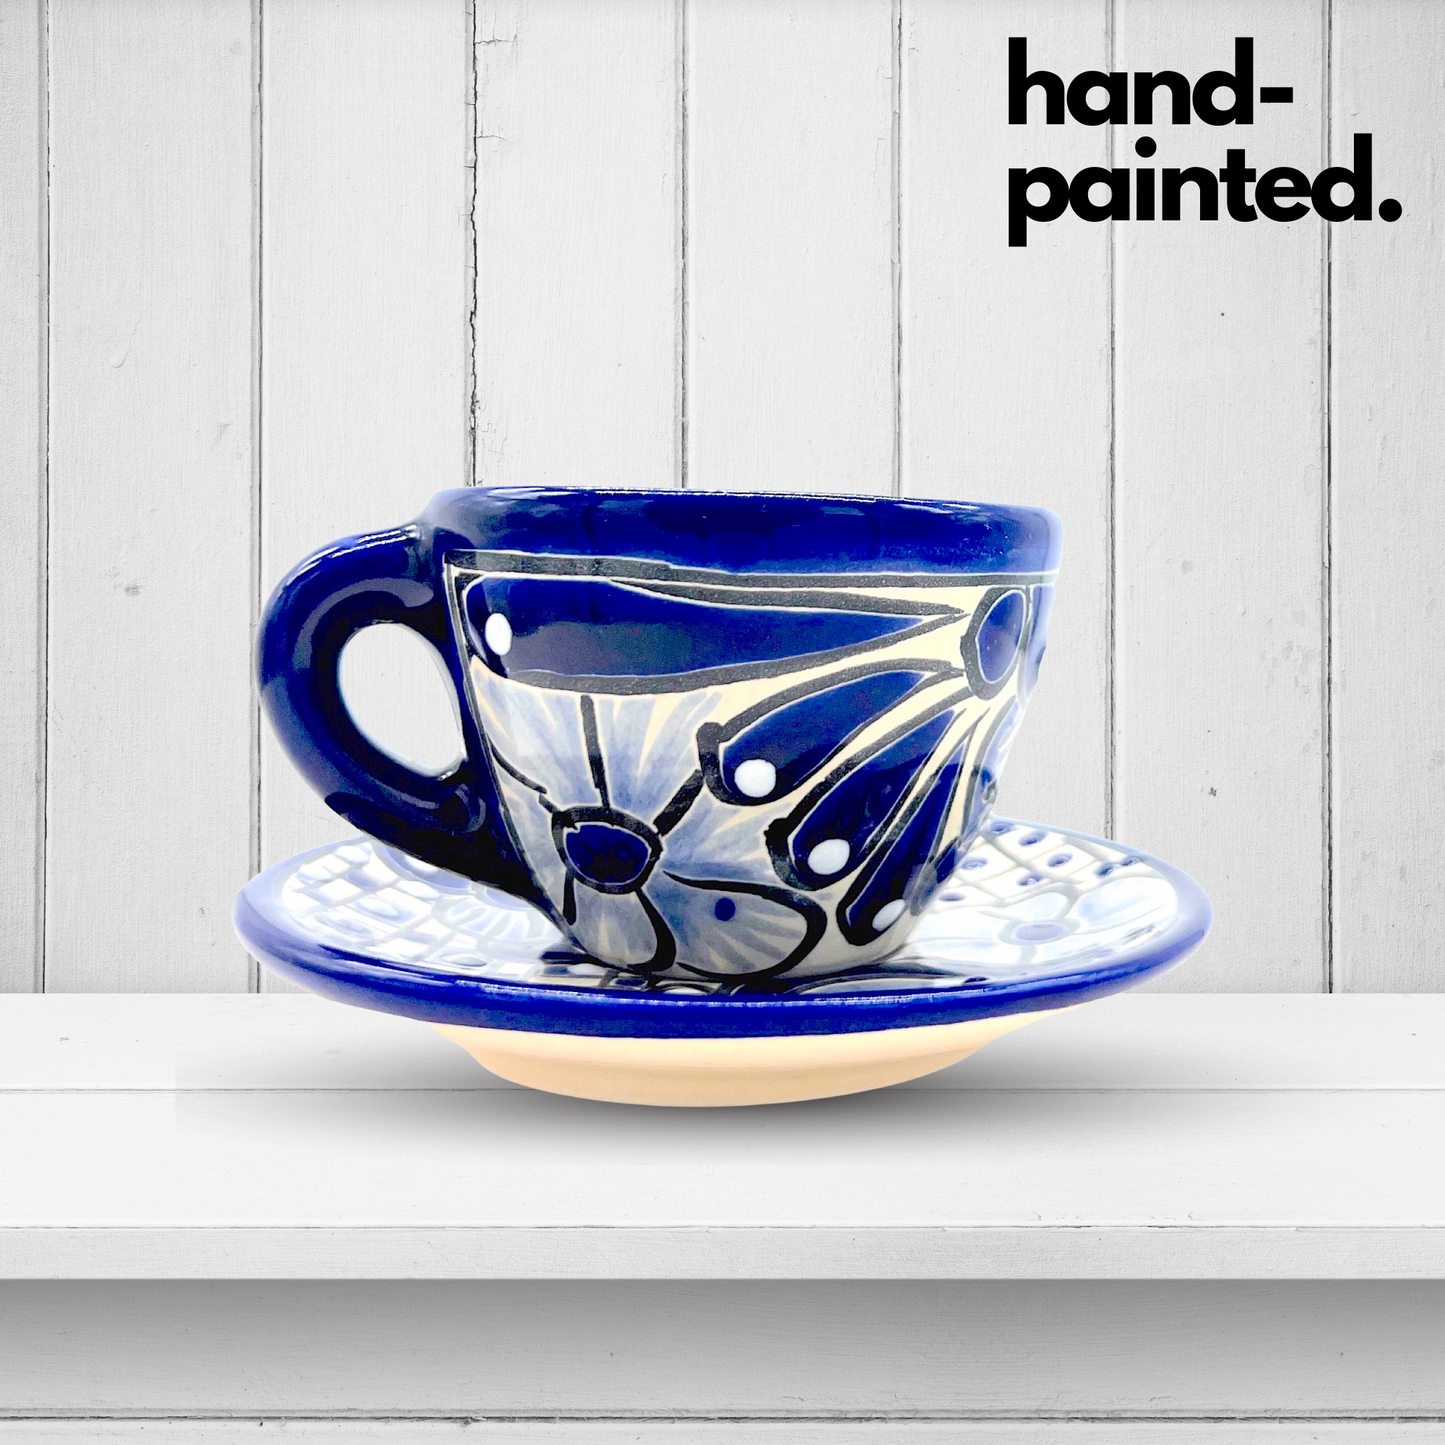 A blue and white, floral, hand-painted Talavera ceramic espresso cup and saucer set, bringing vibrant Mexican culture to your morning coffee ritual.